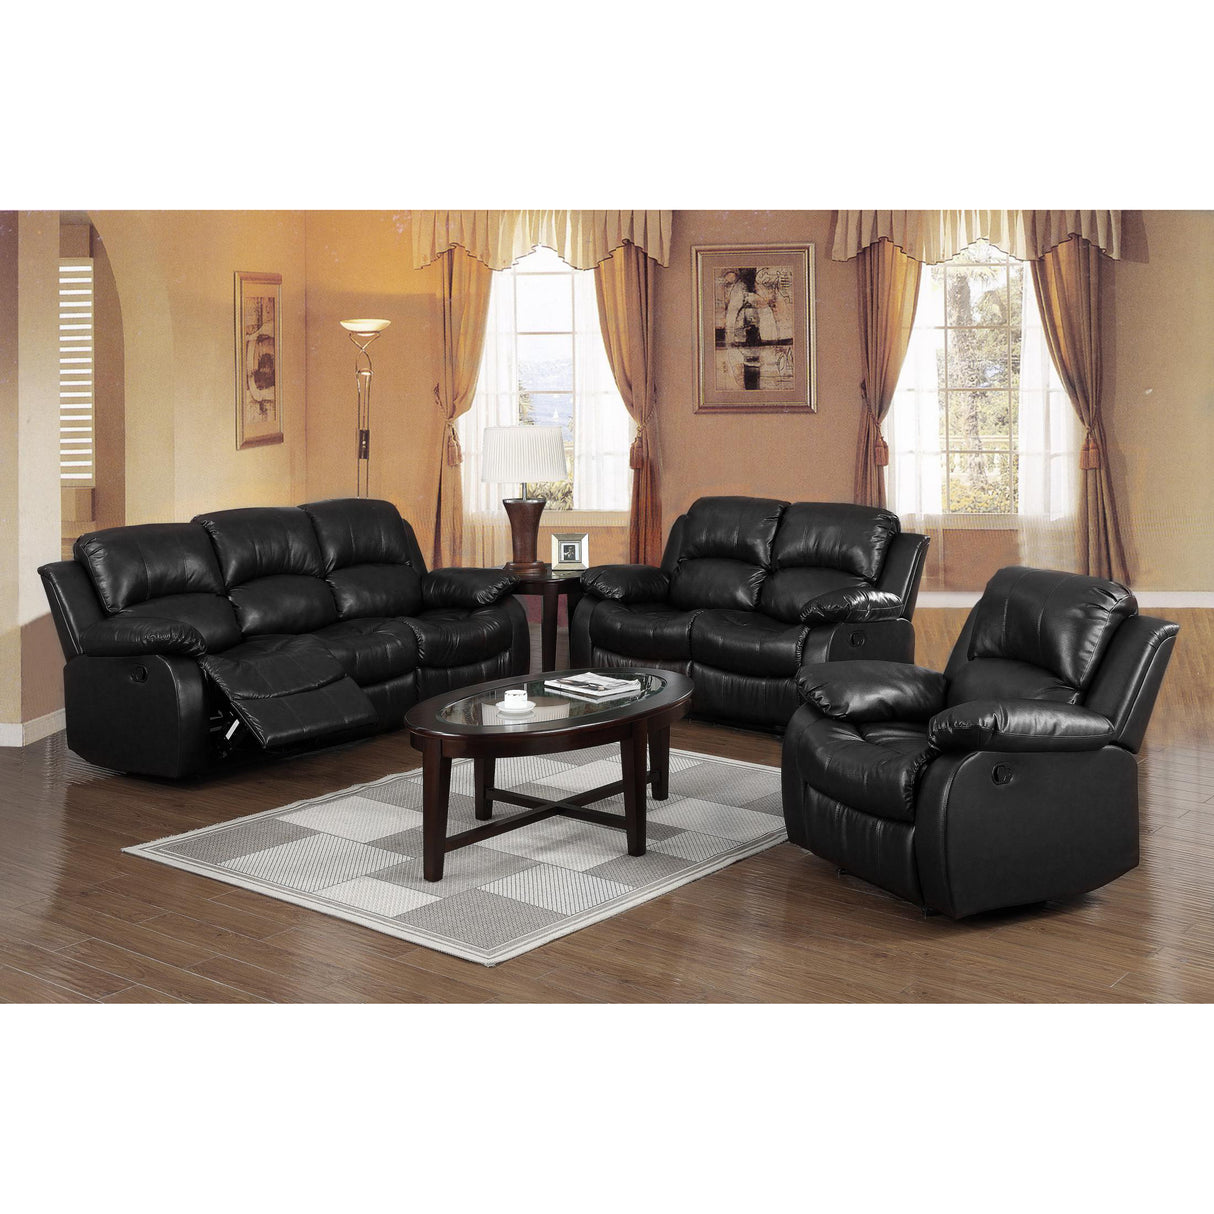 Carlino Recliner Full Bonded Leather 1 Seater Black